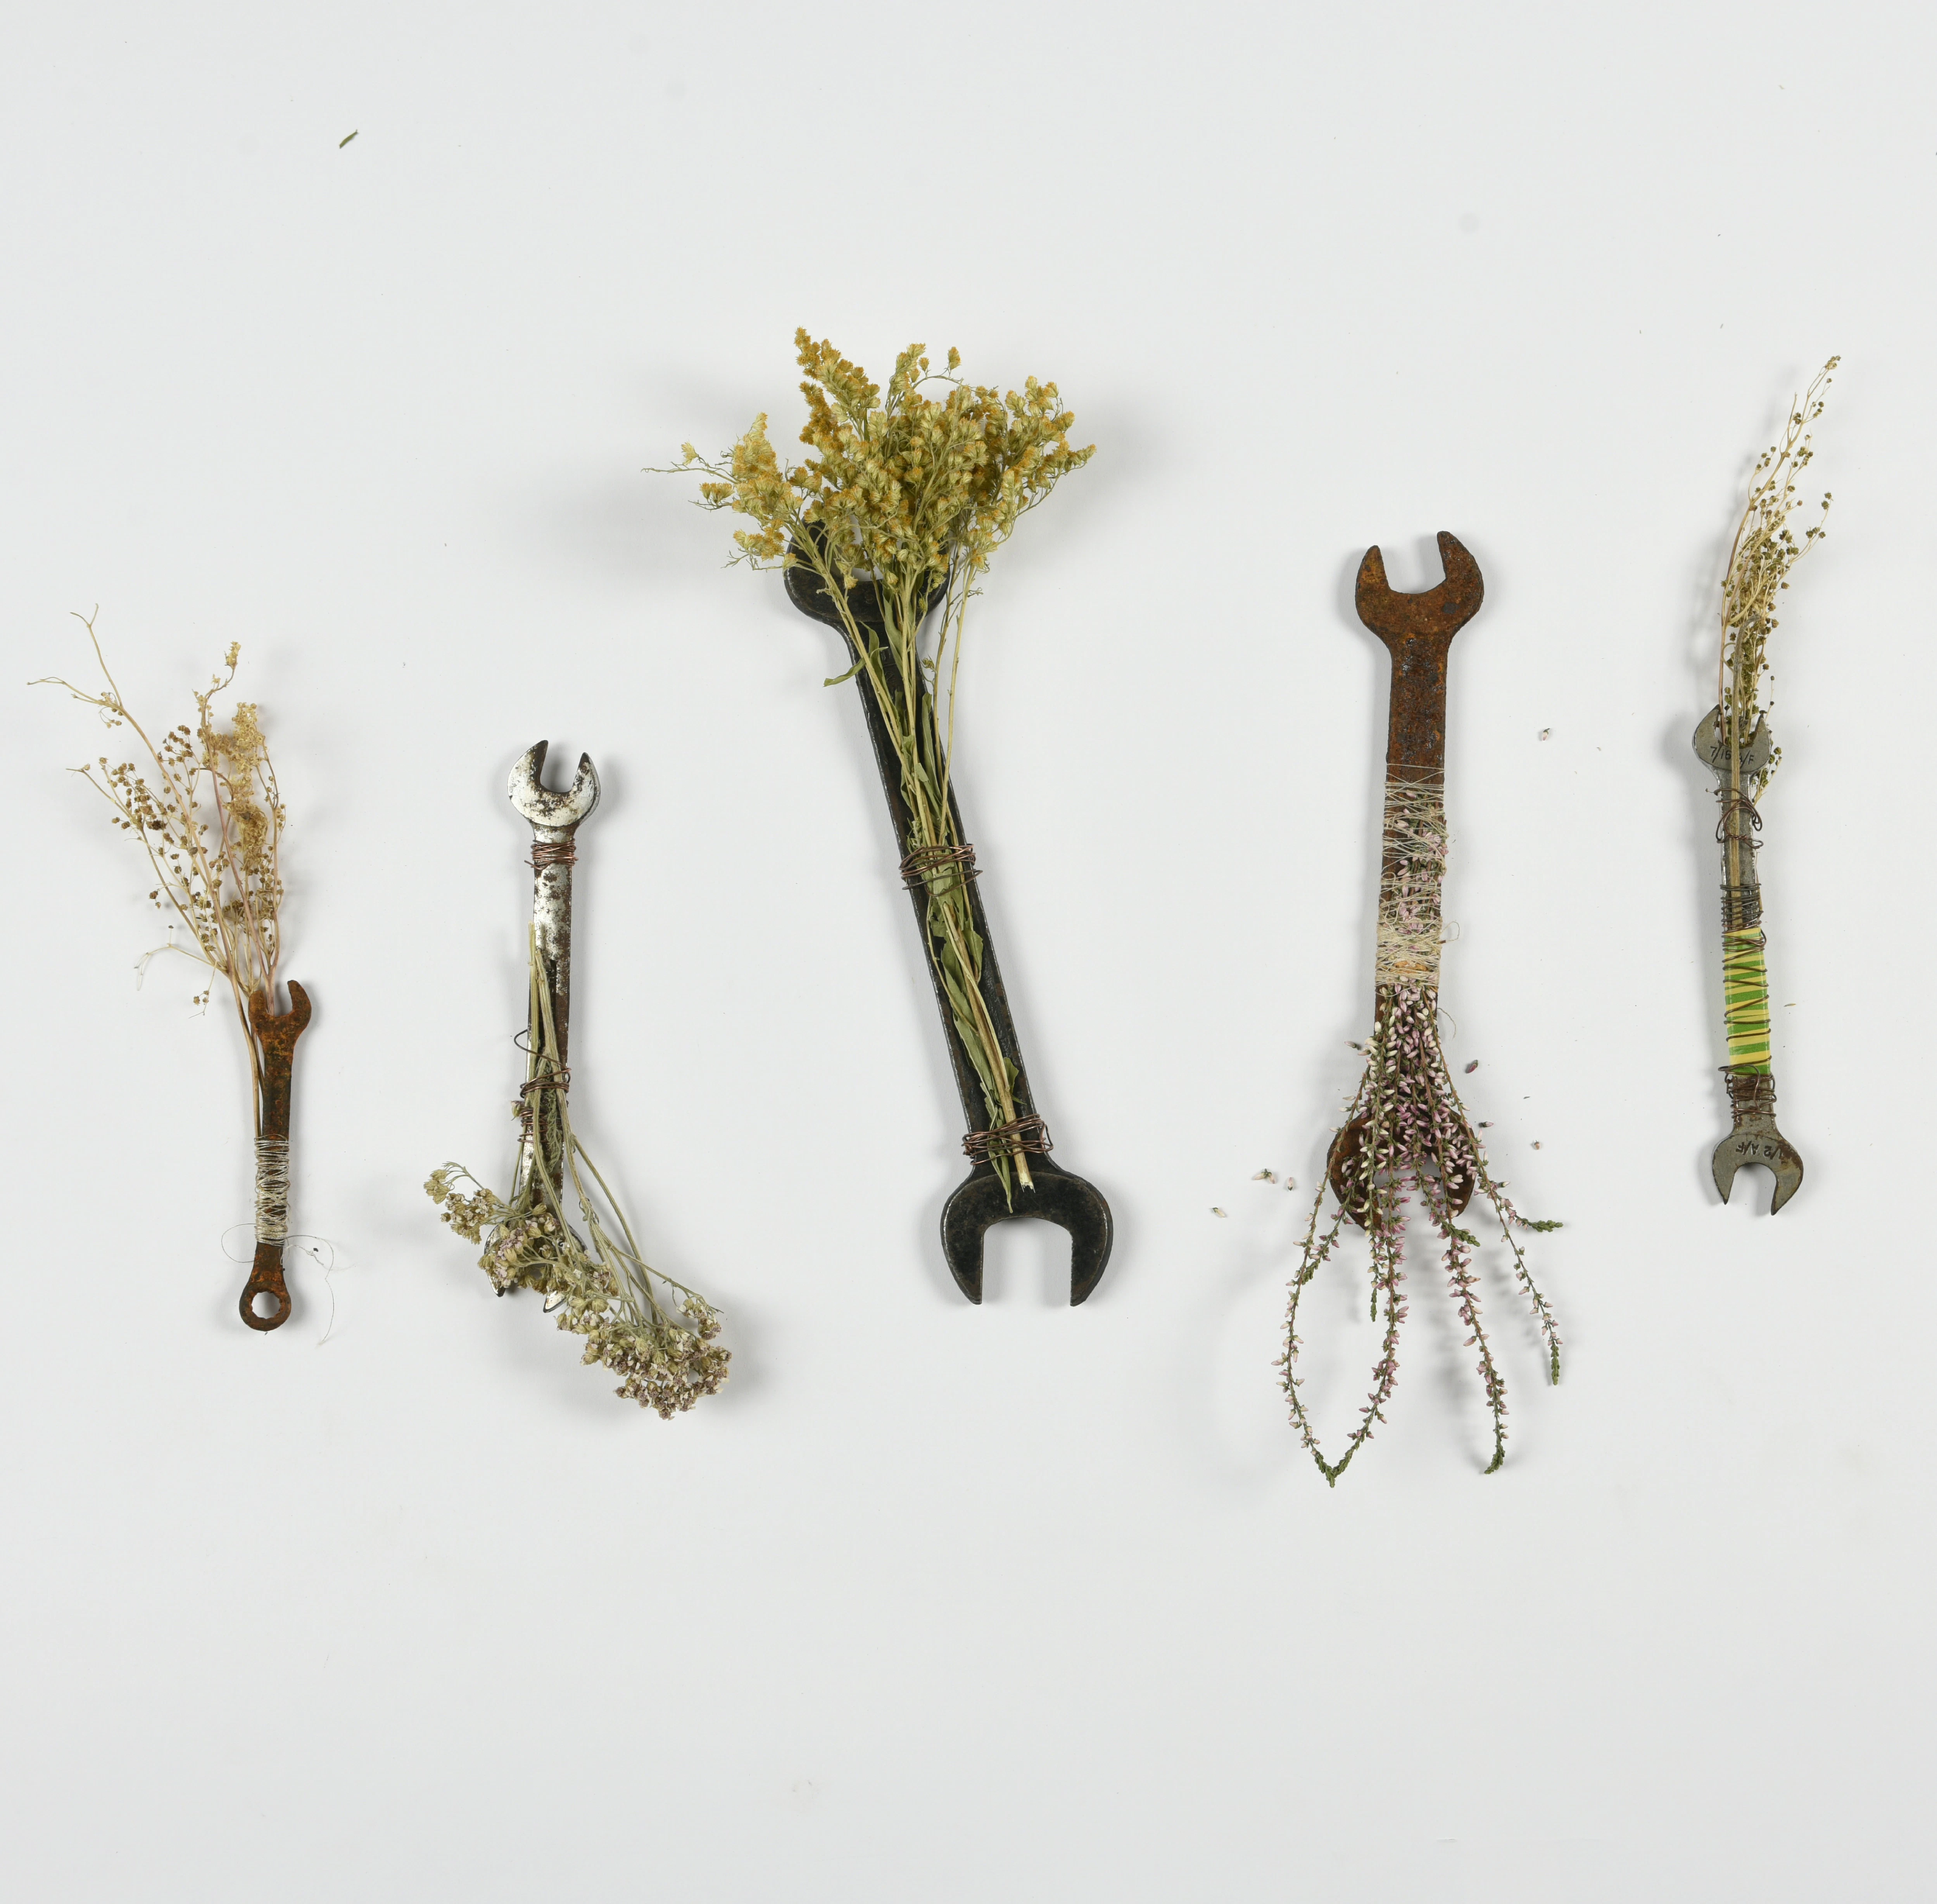 A collection of herbal spanners